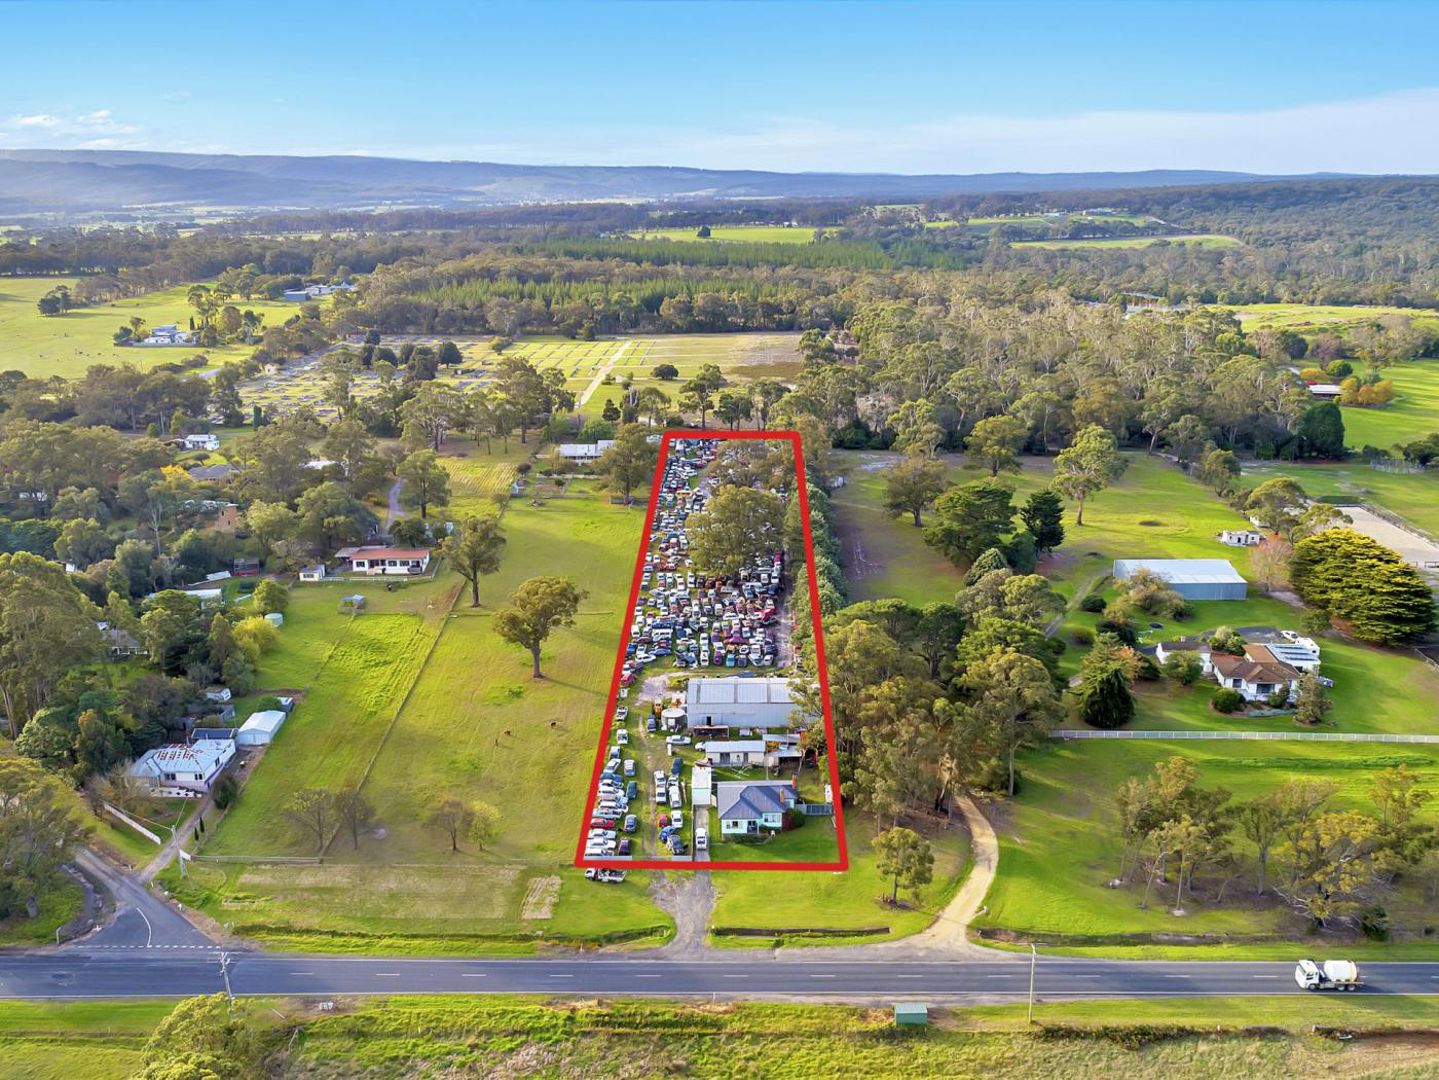 271 South Gippsland Highway Yarram Vic House For Sale As Of 8 Aug 2021 Realestateview